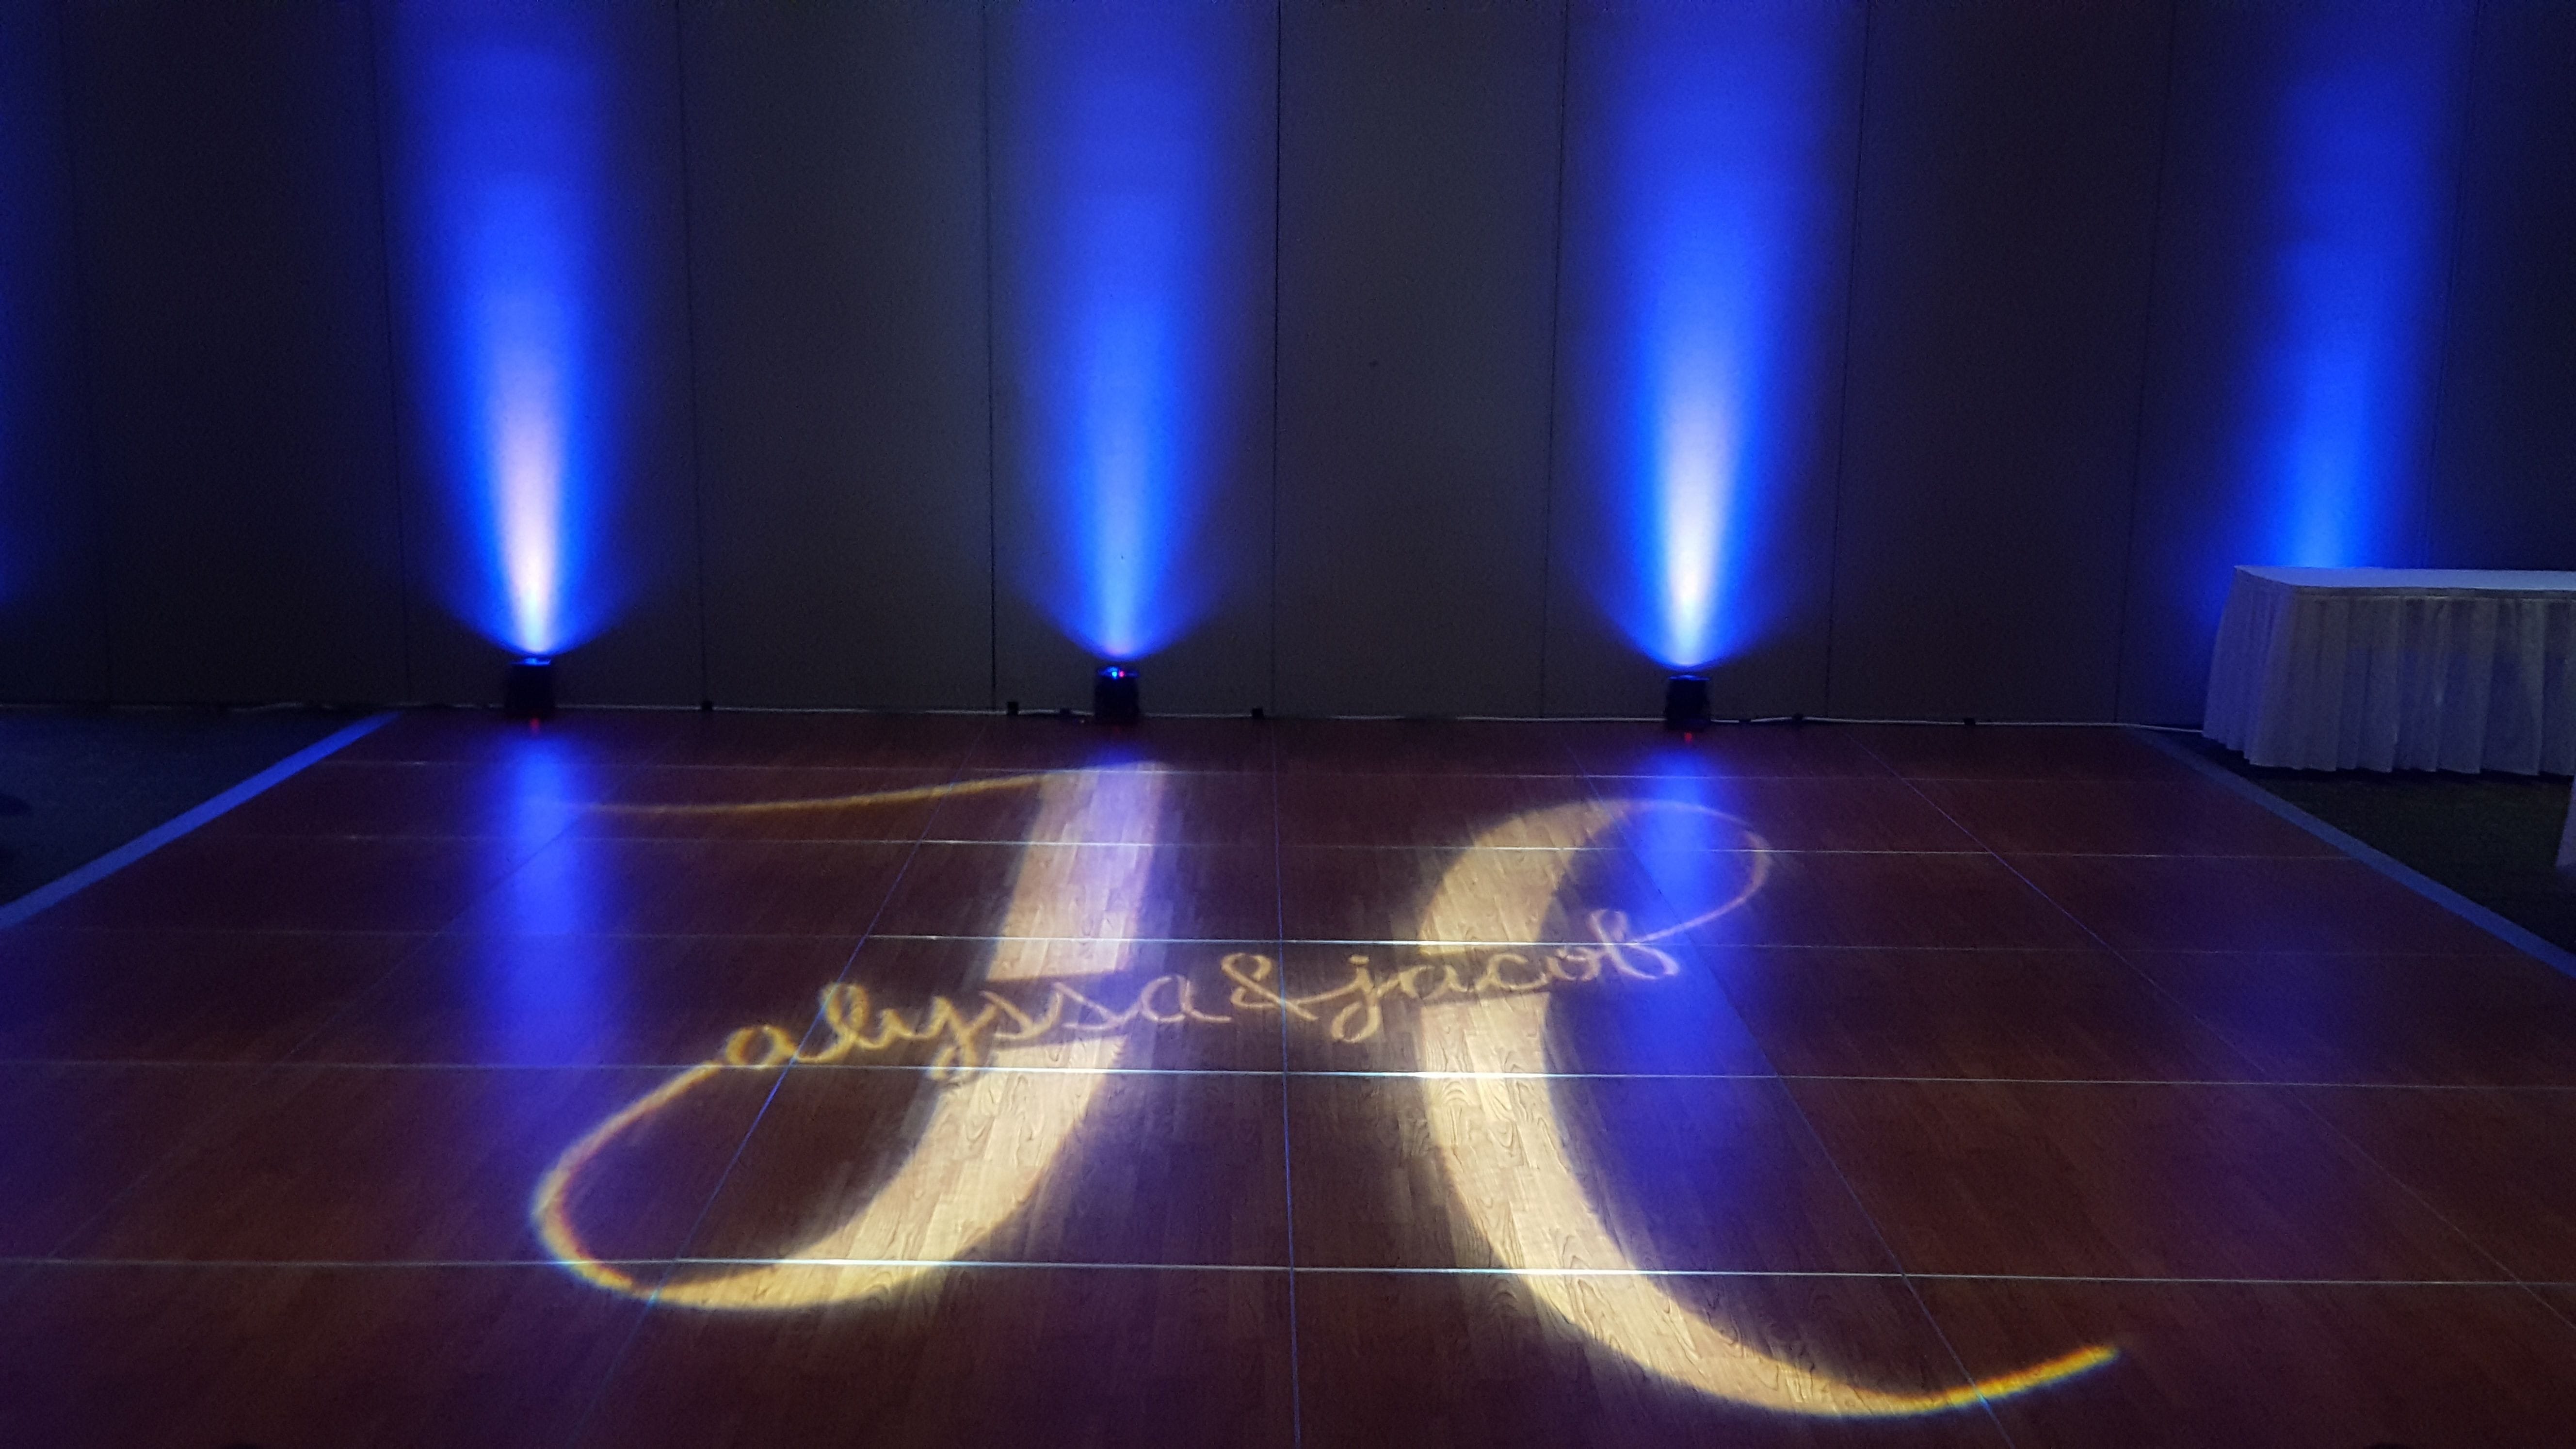 A wedding monogram on the dance floor with purple up lighting in the background.